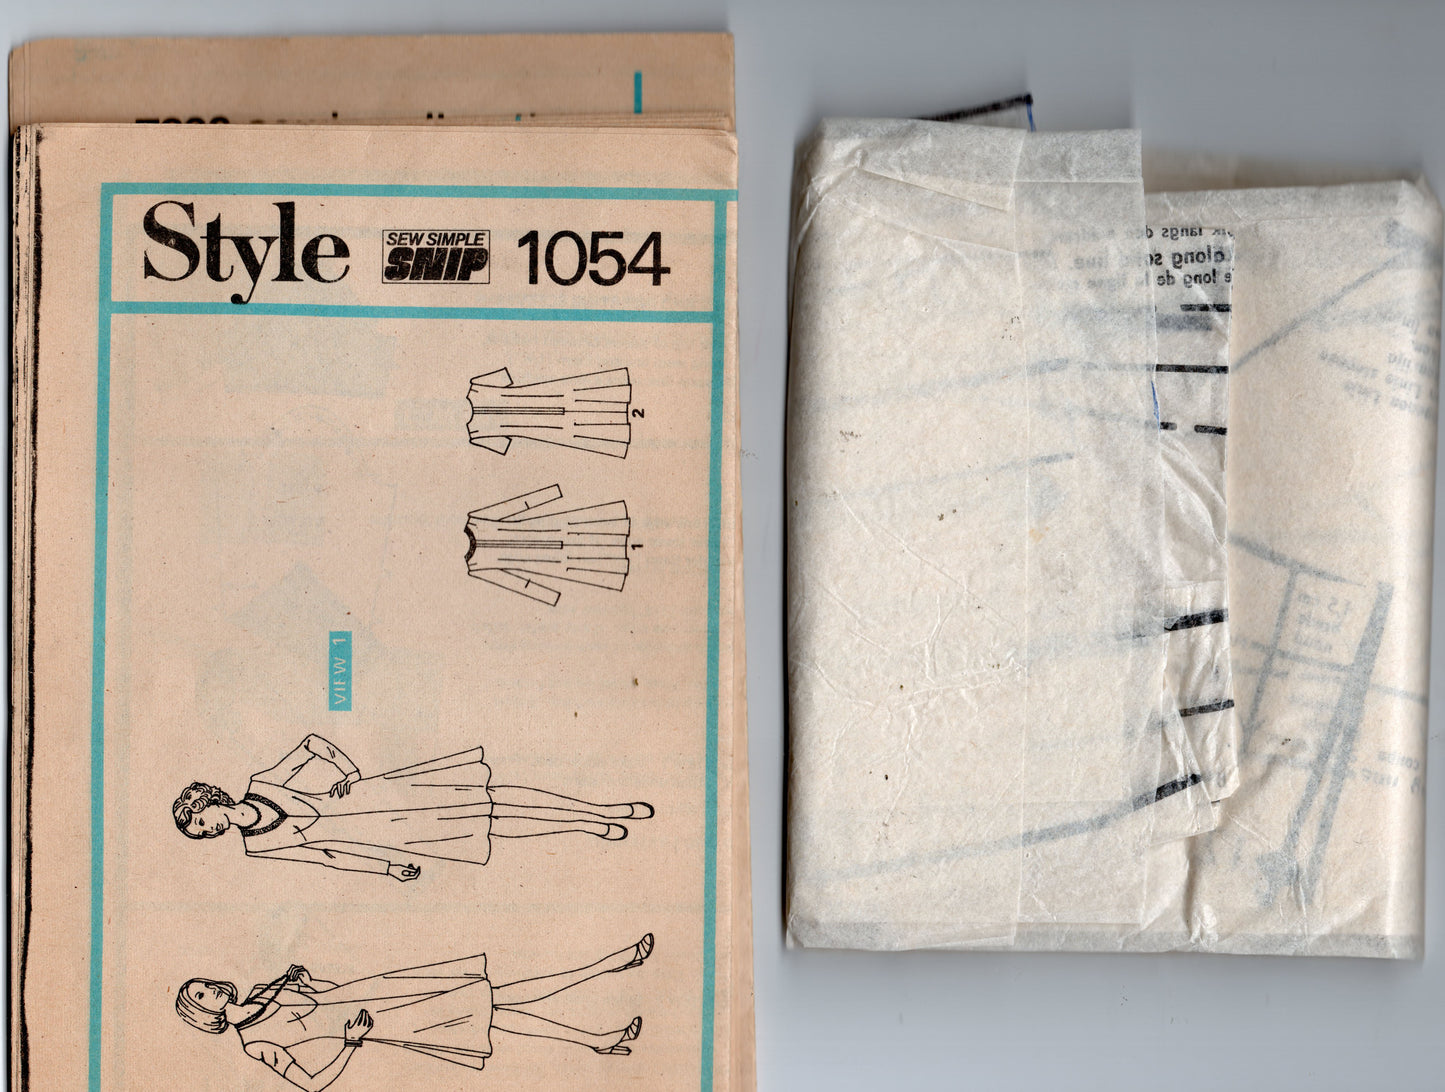 Style 1054 Womens EASY Fit & Flare Dress 1970s Vintage Sewing Pattern Size 14 Bust 36 inches